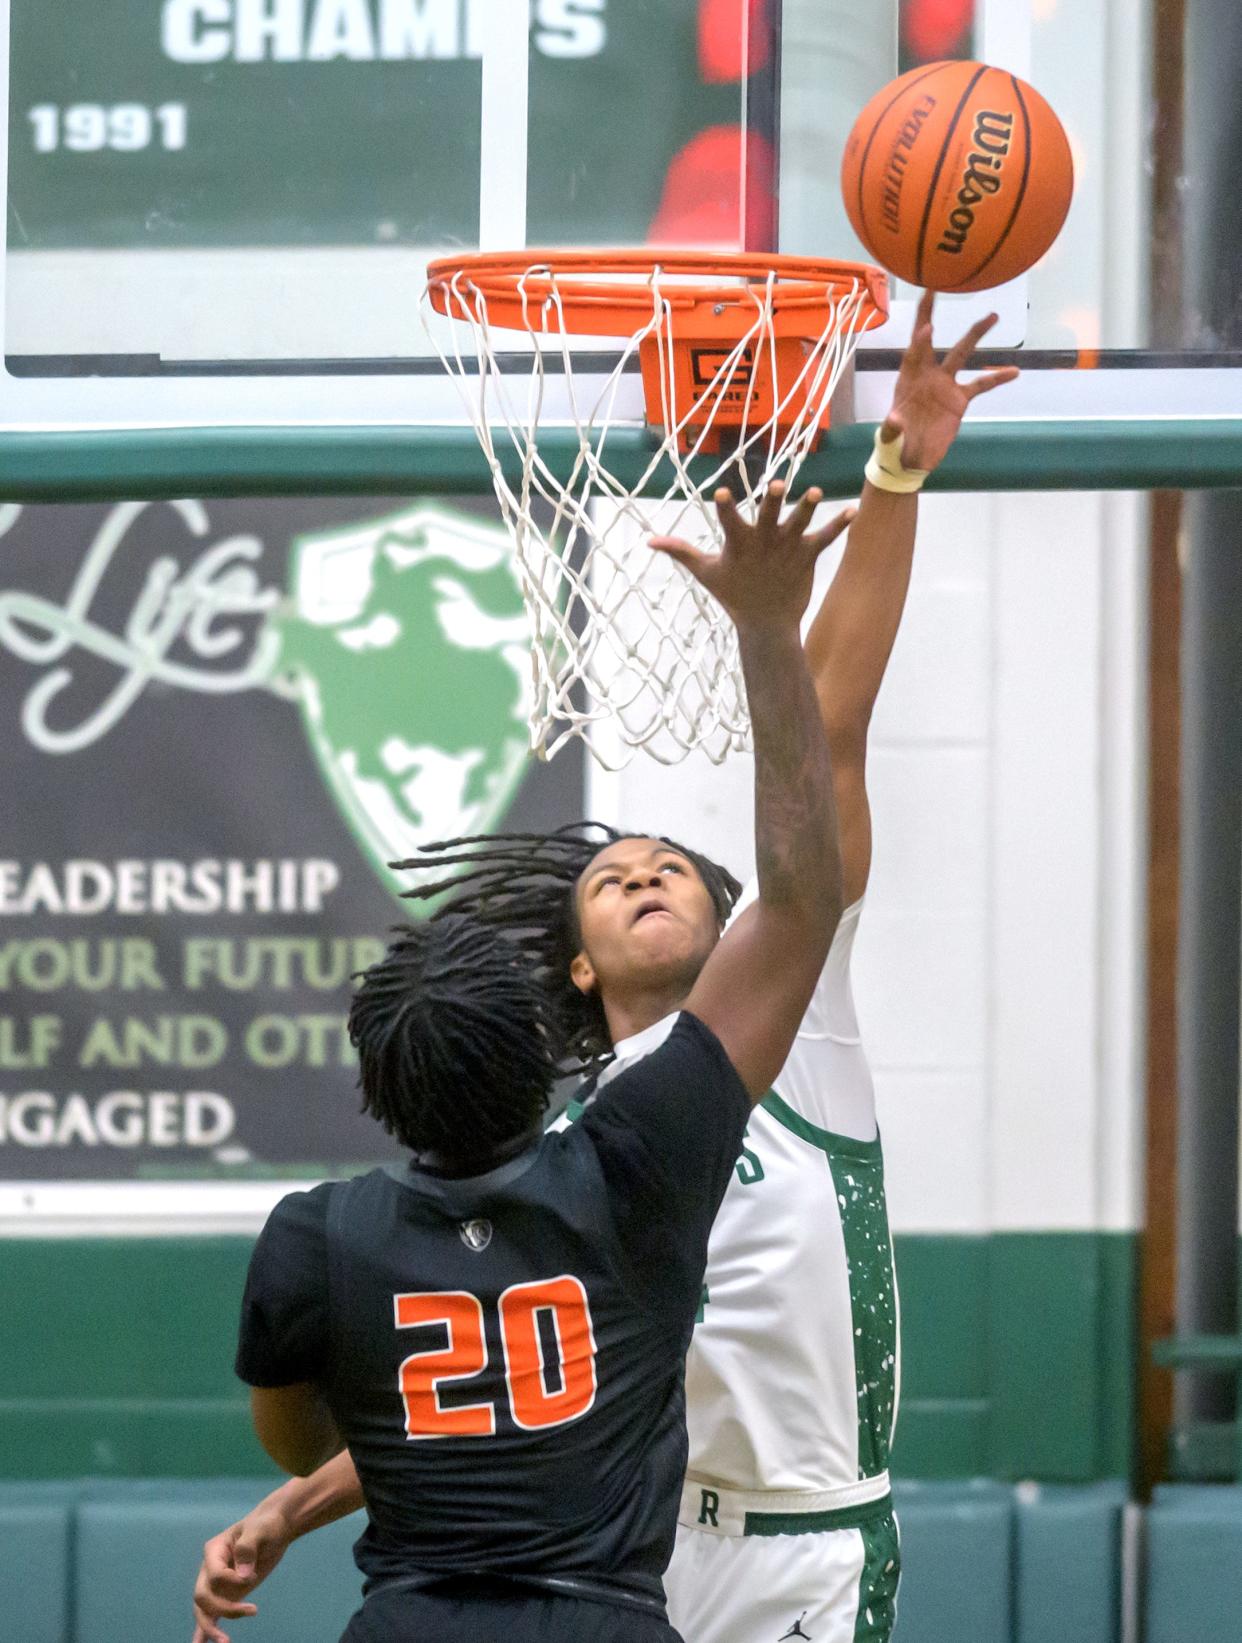 Richwoods' Tavie Smith, facing, defends against a shot from Manual's Jakyle Green in the second half of their Big Twelve Conference basketball game Tuesday, Dec. 5, 2023 at Richwoods High School. The Knights defeated the Rams 73-51.